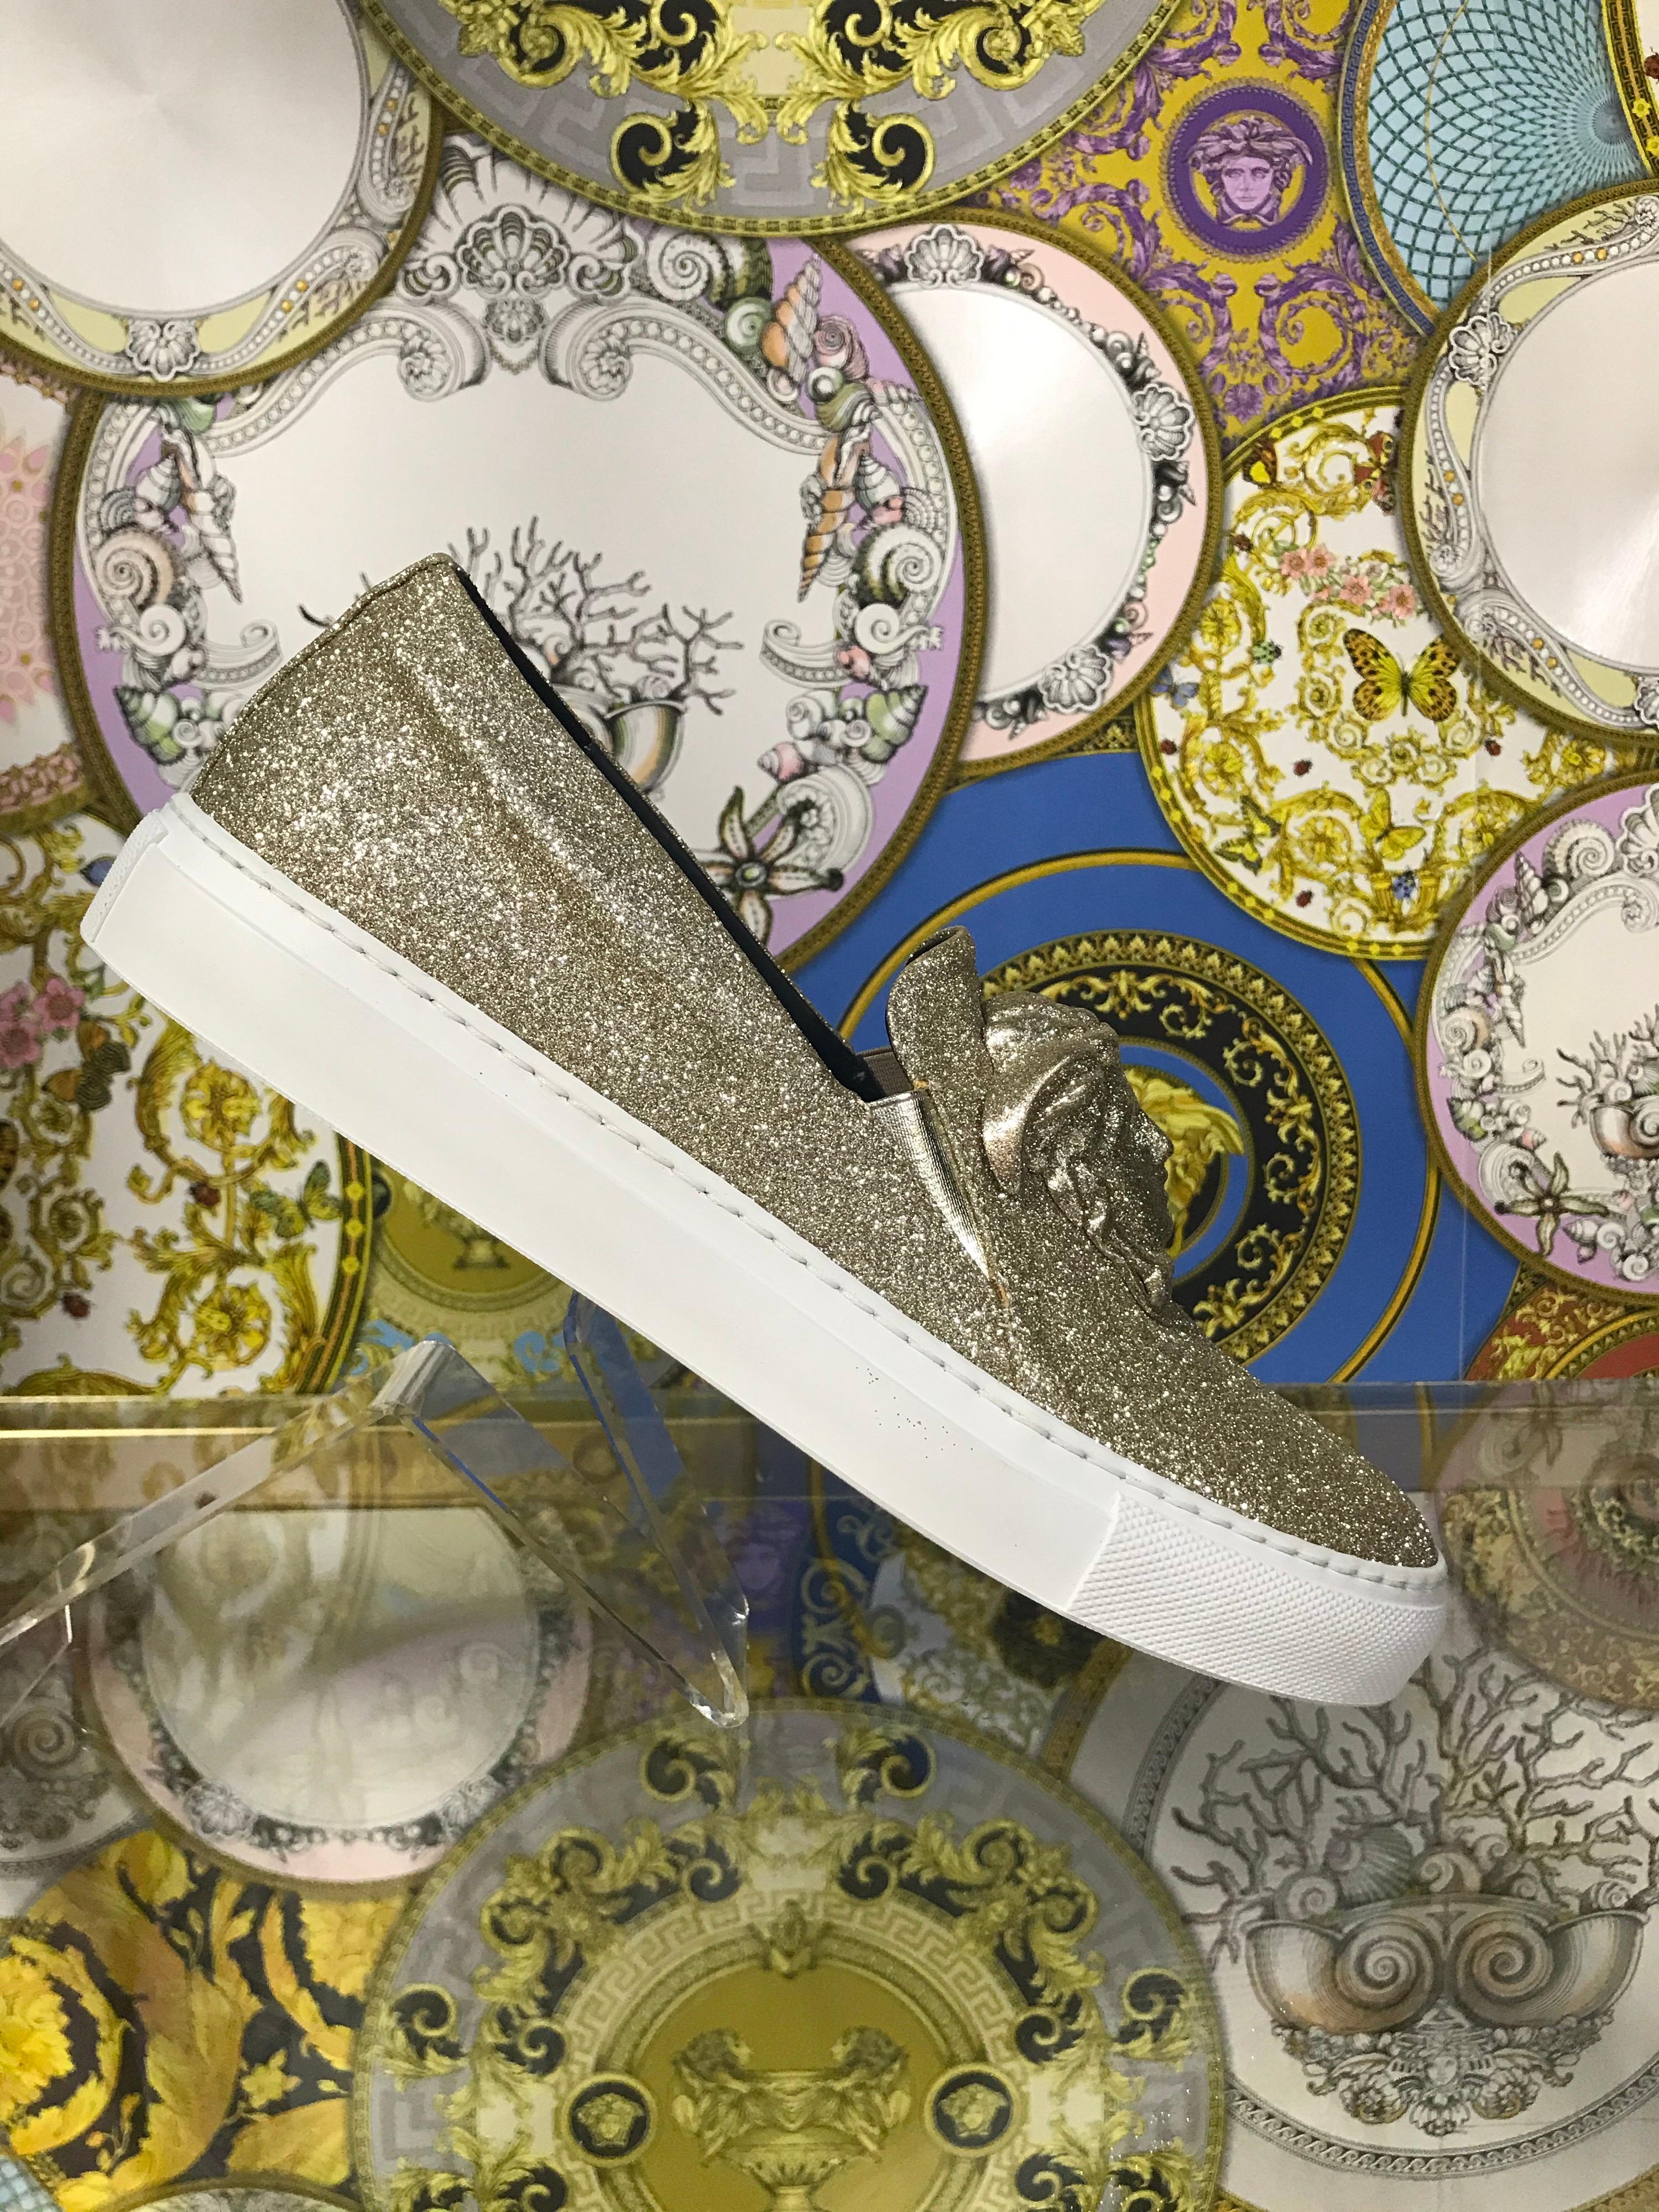 BRAND NEW 

VERSACE 

PALAZZO LOW-TOP SNEAKERS

From the LIMITED EDITION line, these Versace sneakers feature a sophisticated design.

Low-top style

Glitter finish

Rubber sole

Italian size is 37.5 - US 7.5

Brand New